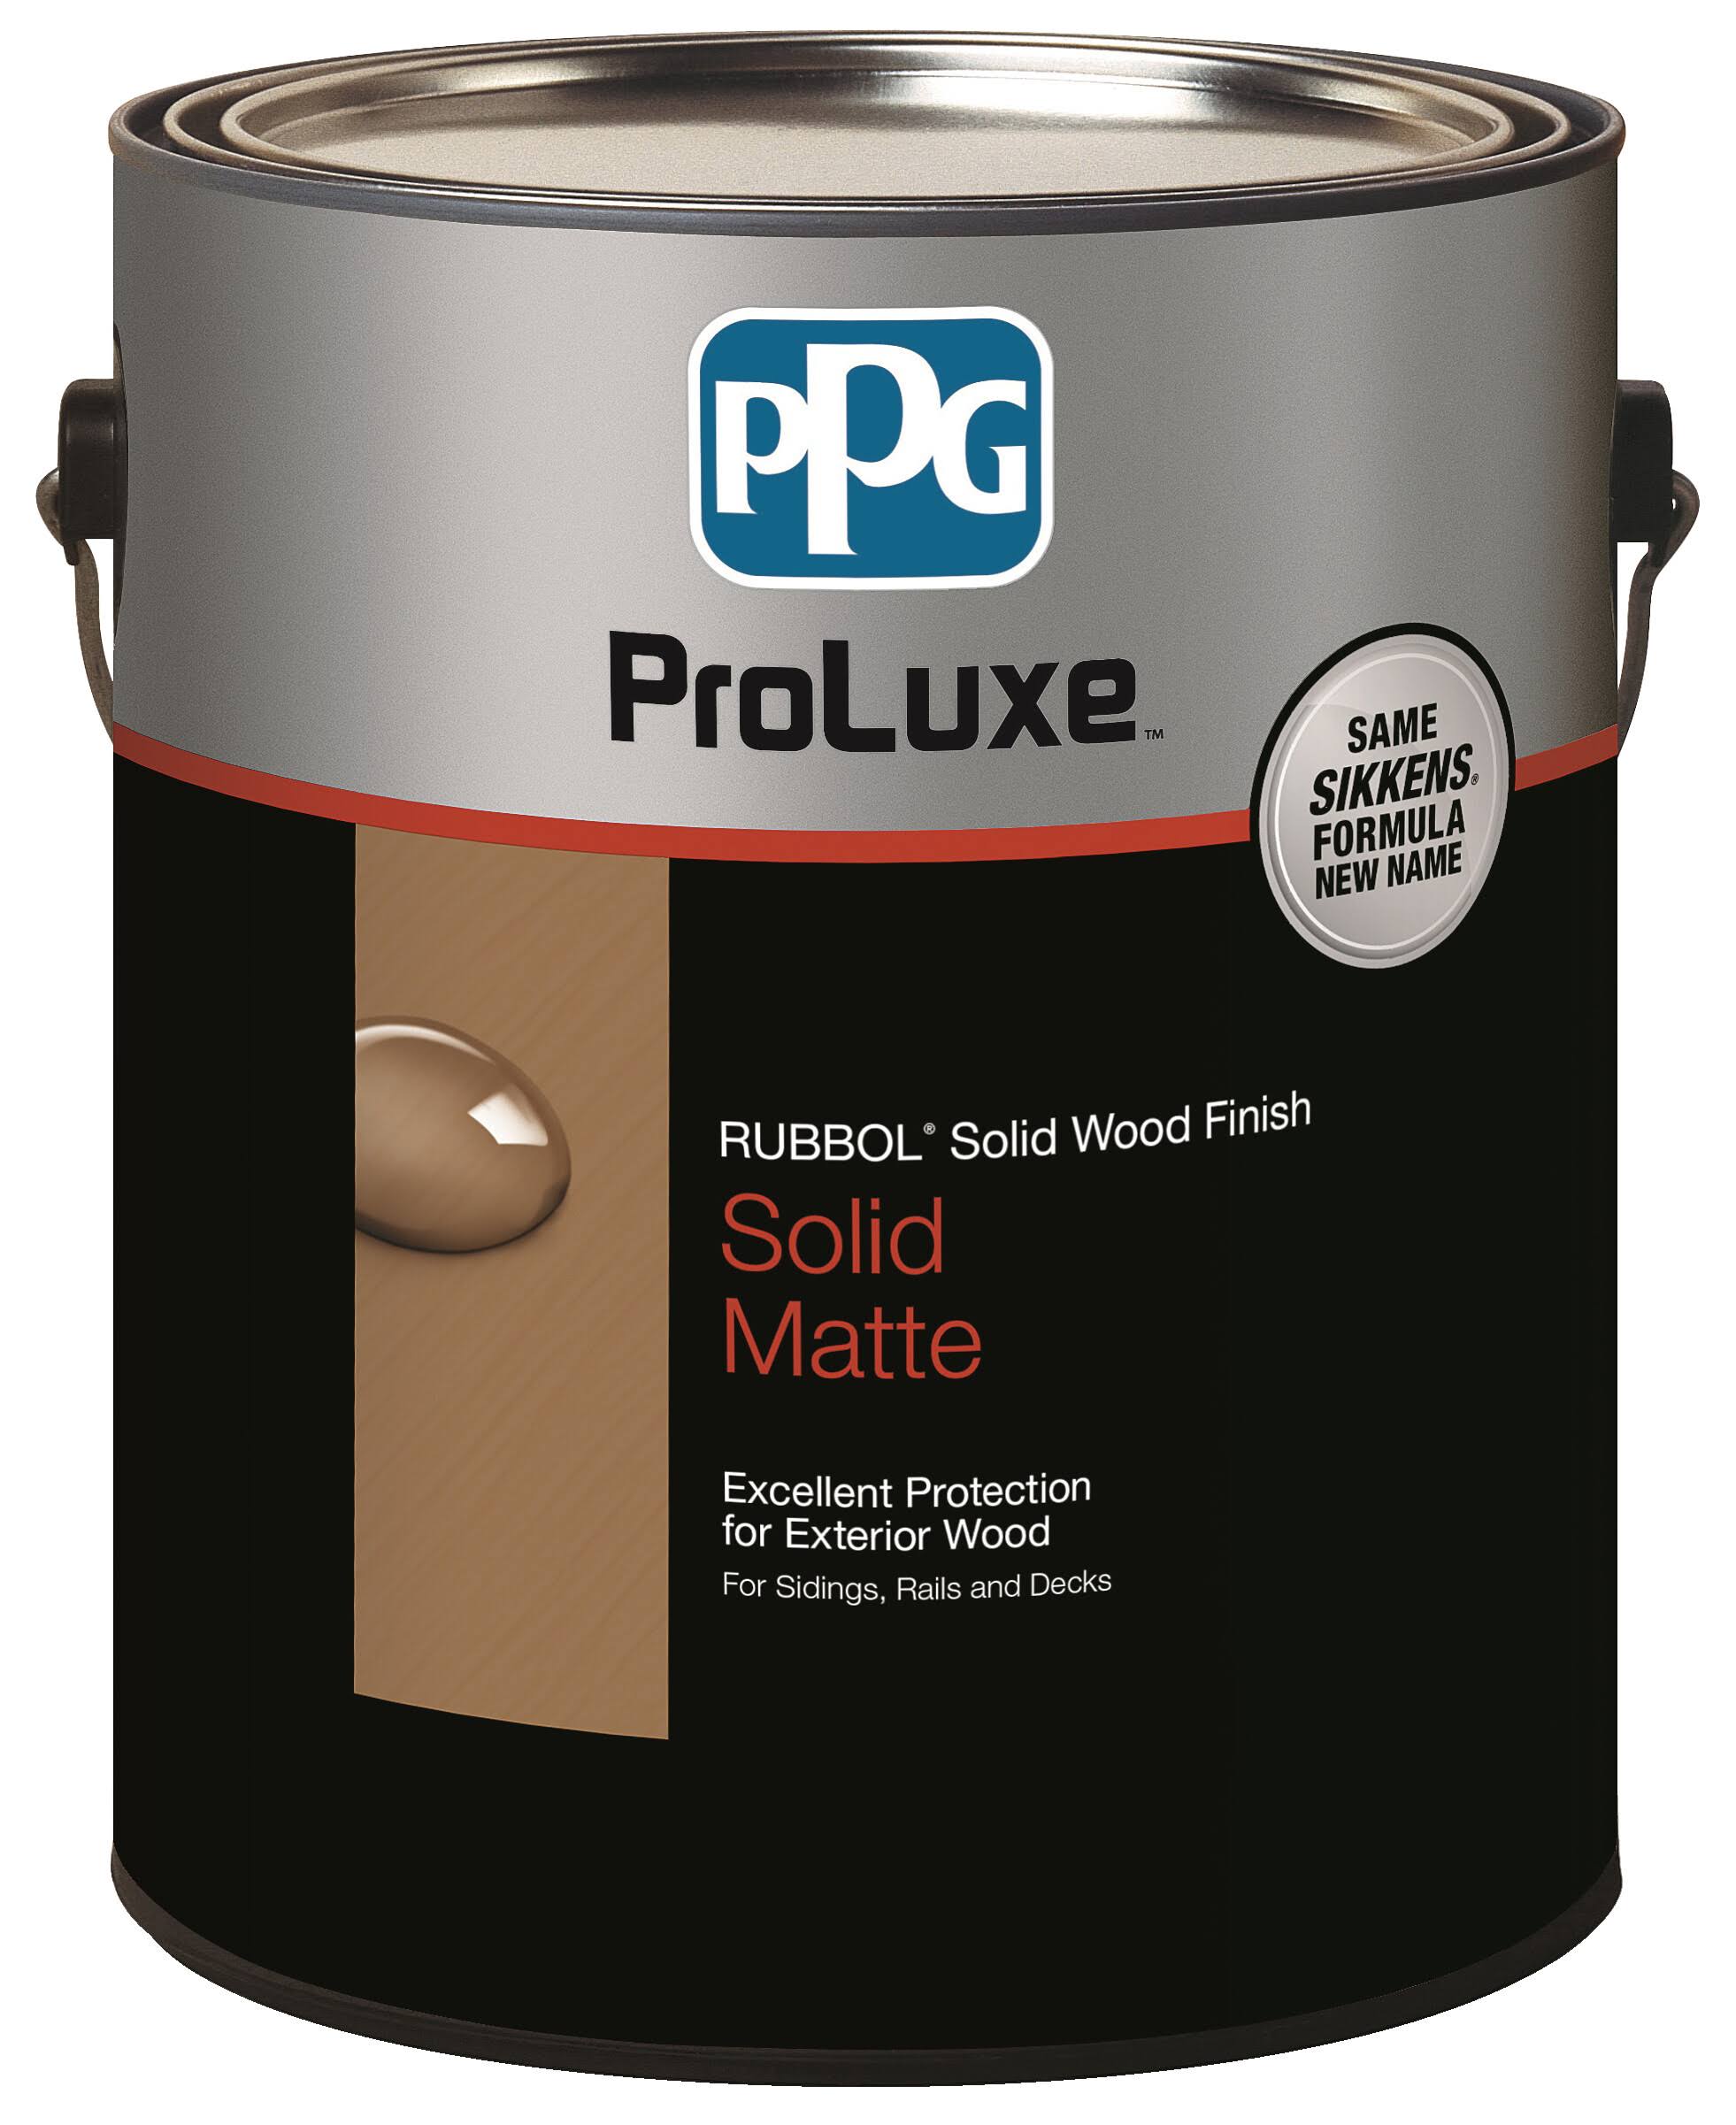 ProLuxe Wood Stain Rubbol Solid Low Luster Light Tint Base Acrylic 1 gal Light SIK710-110.01